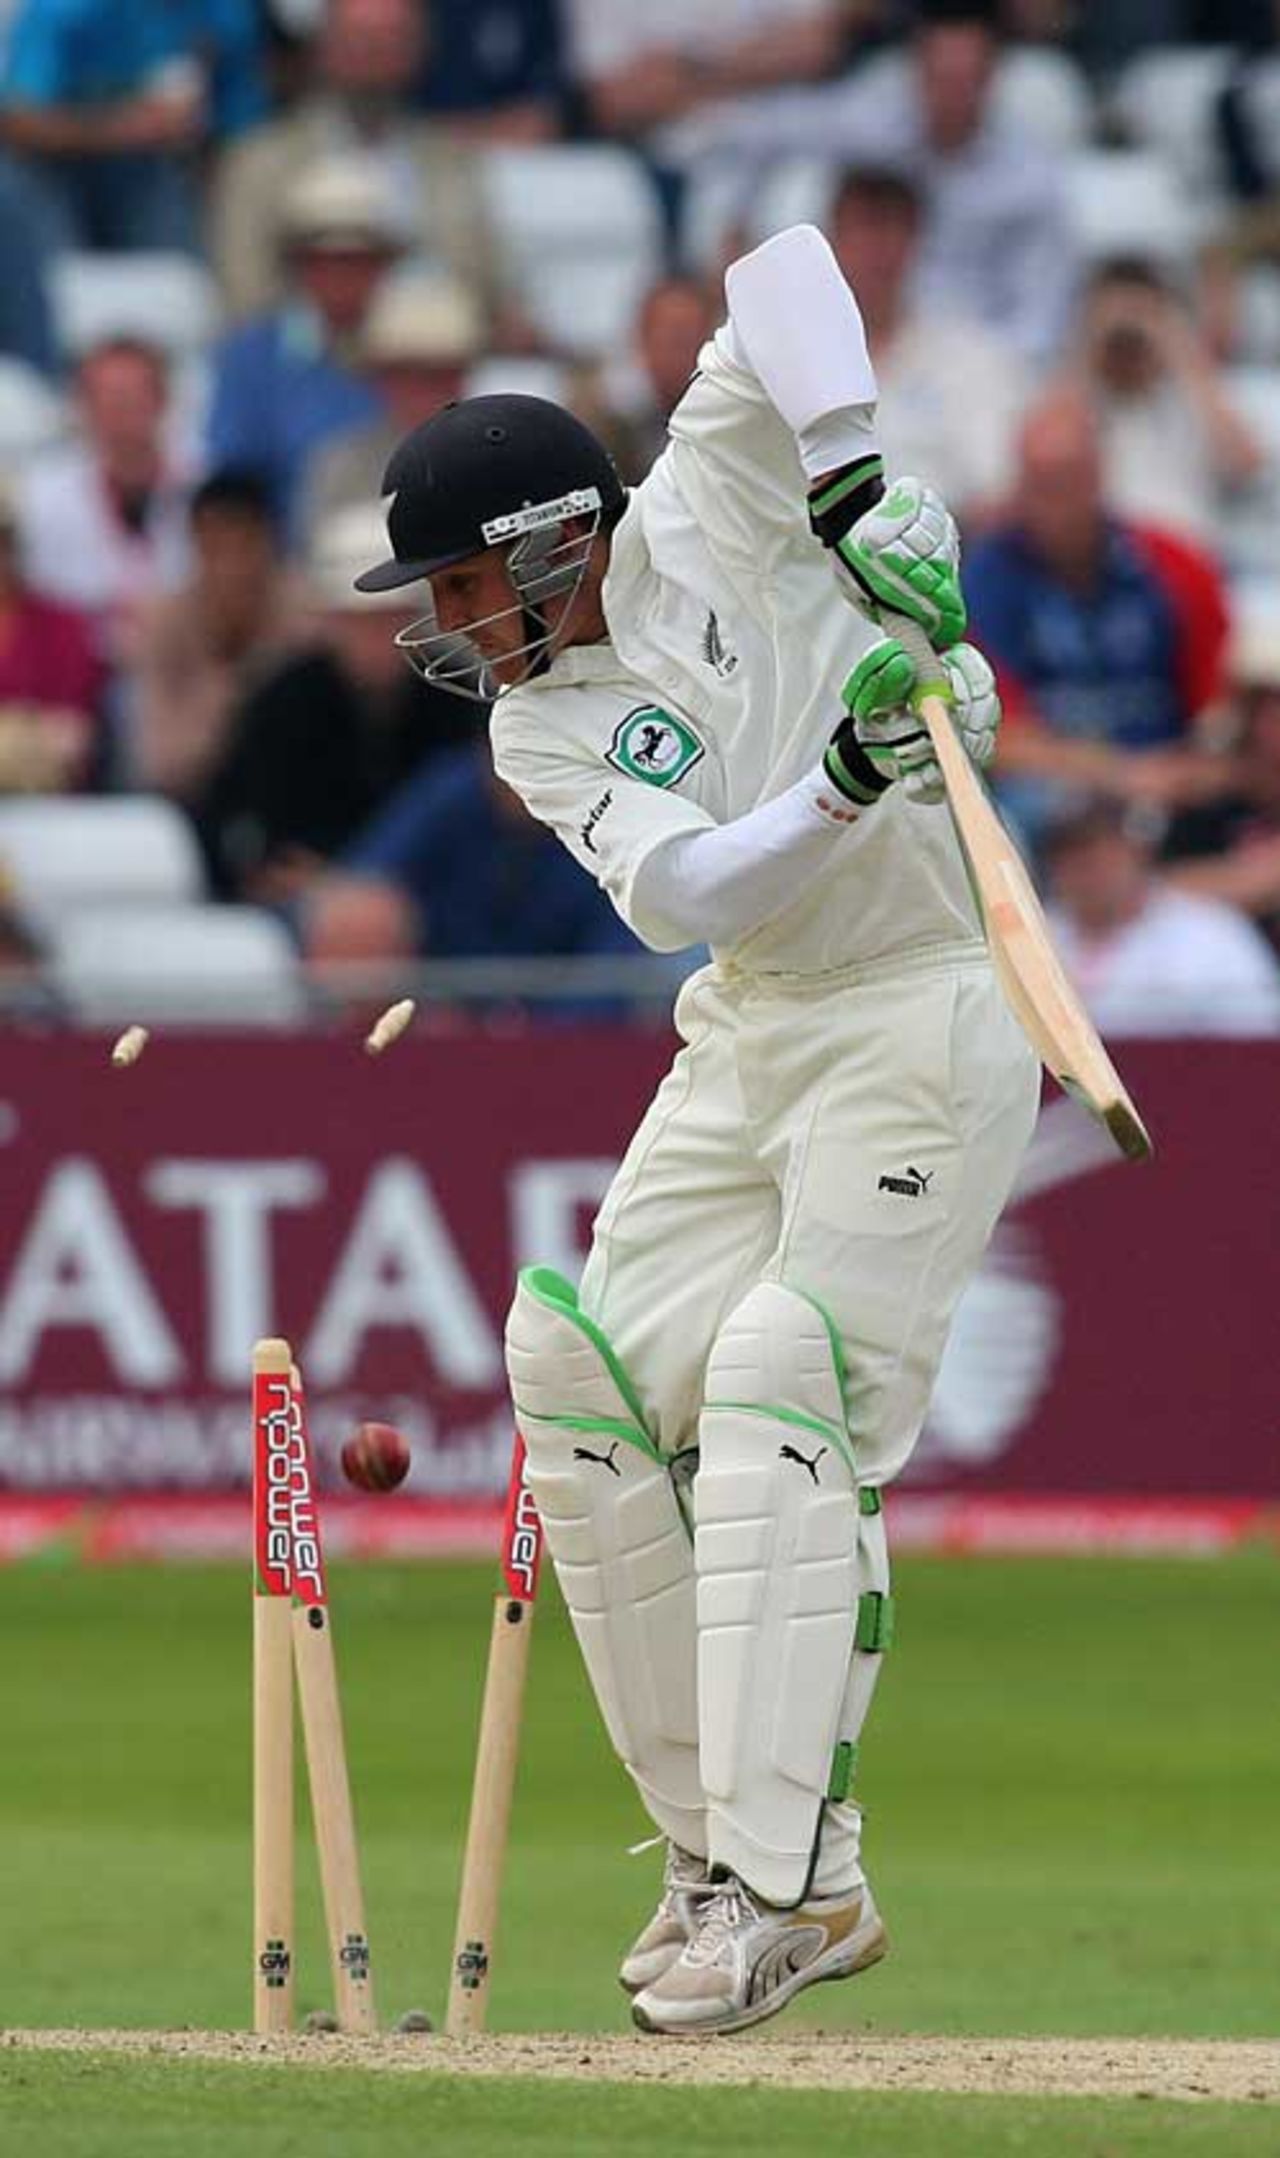 Brendon McCullum is bowled by James Anderson, England v New Zealand, 3rd Test, Trent Bridge, June 7, 2008